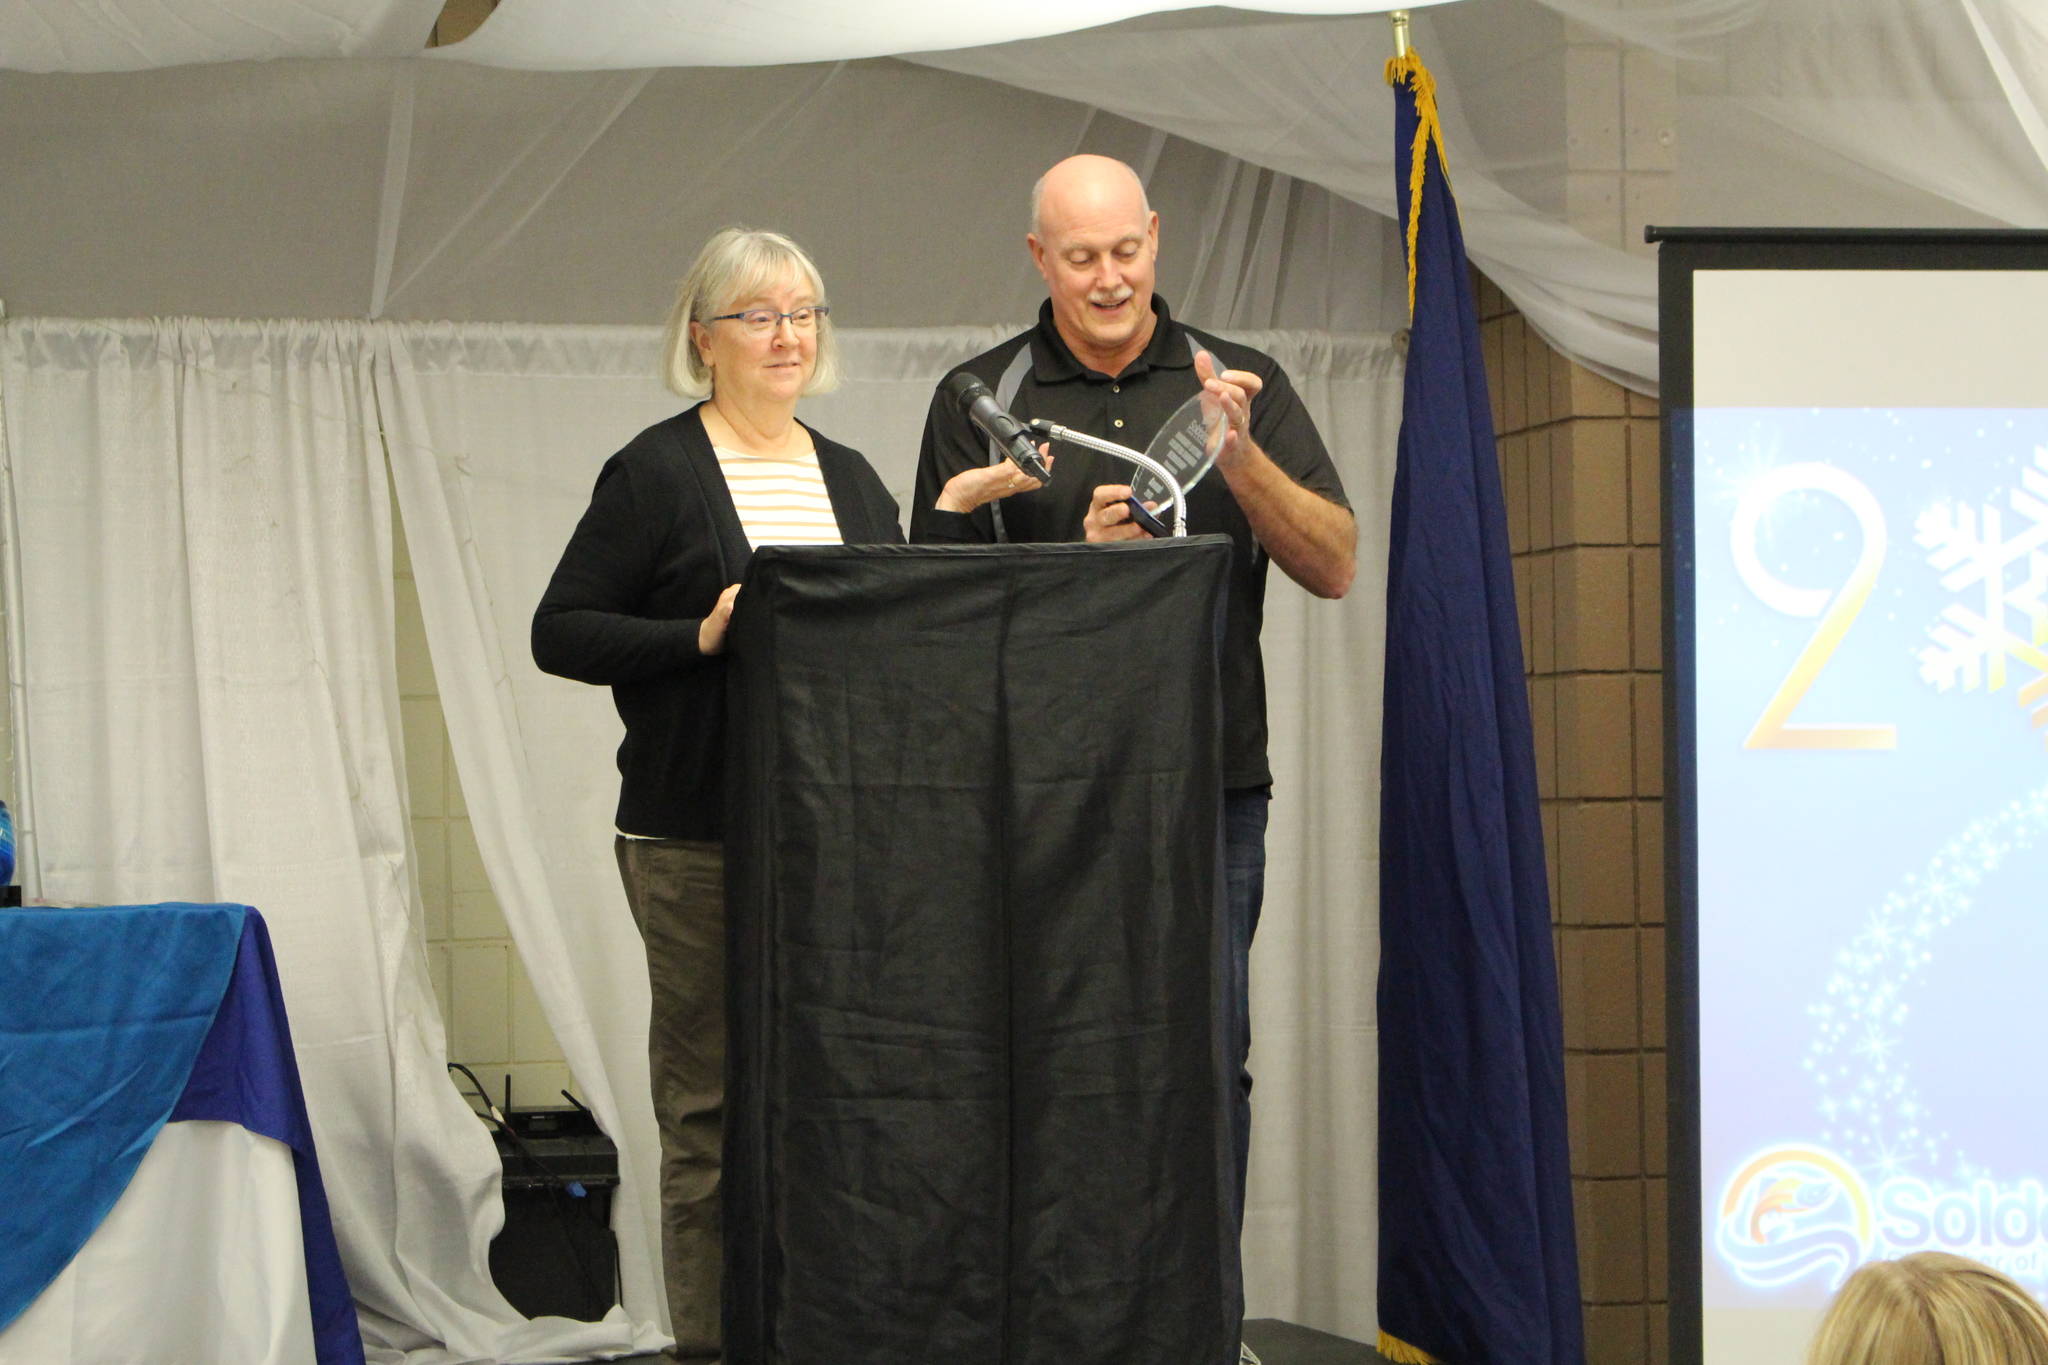 Kathy and Dan Gensel accept their award for Honorary Lifetime Soldotna Chamber Membership at the Soldotna Chamber of Commerce Awards Luncheon at the Soldotna Regional Sports Complex on Dec. 11, 2019. (Photo by Brian Mazurek/Peninsula Clarion)